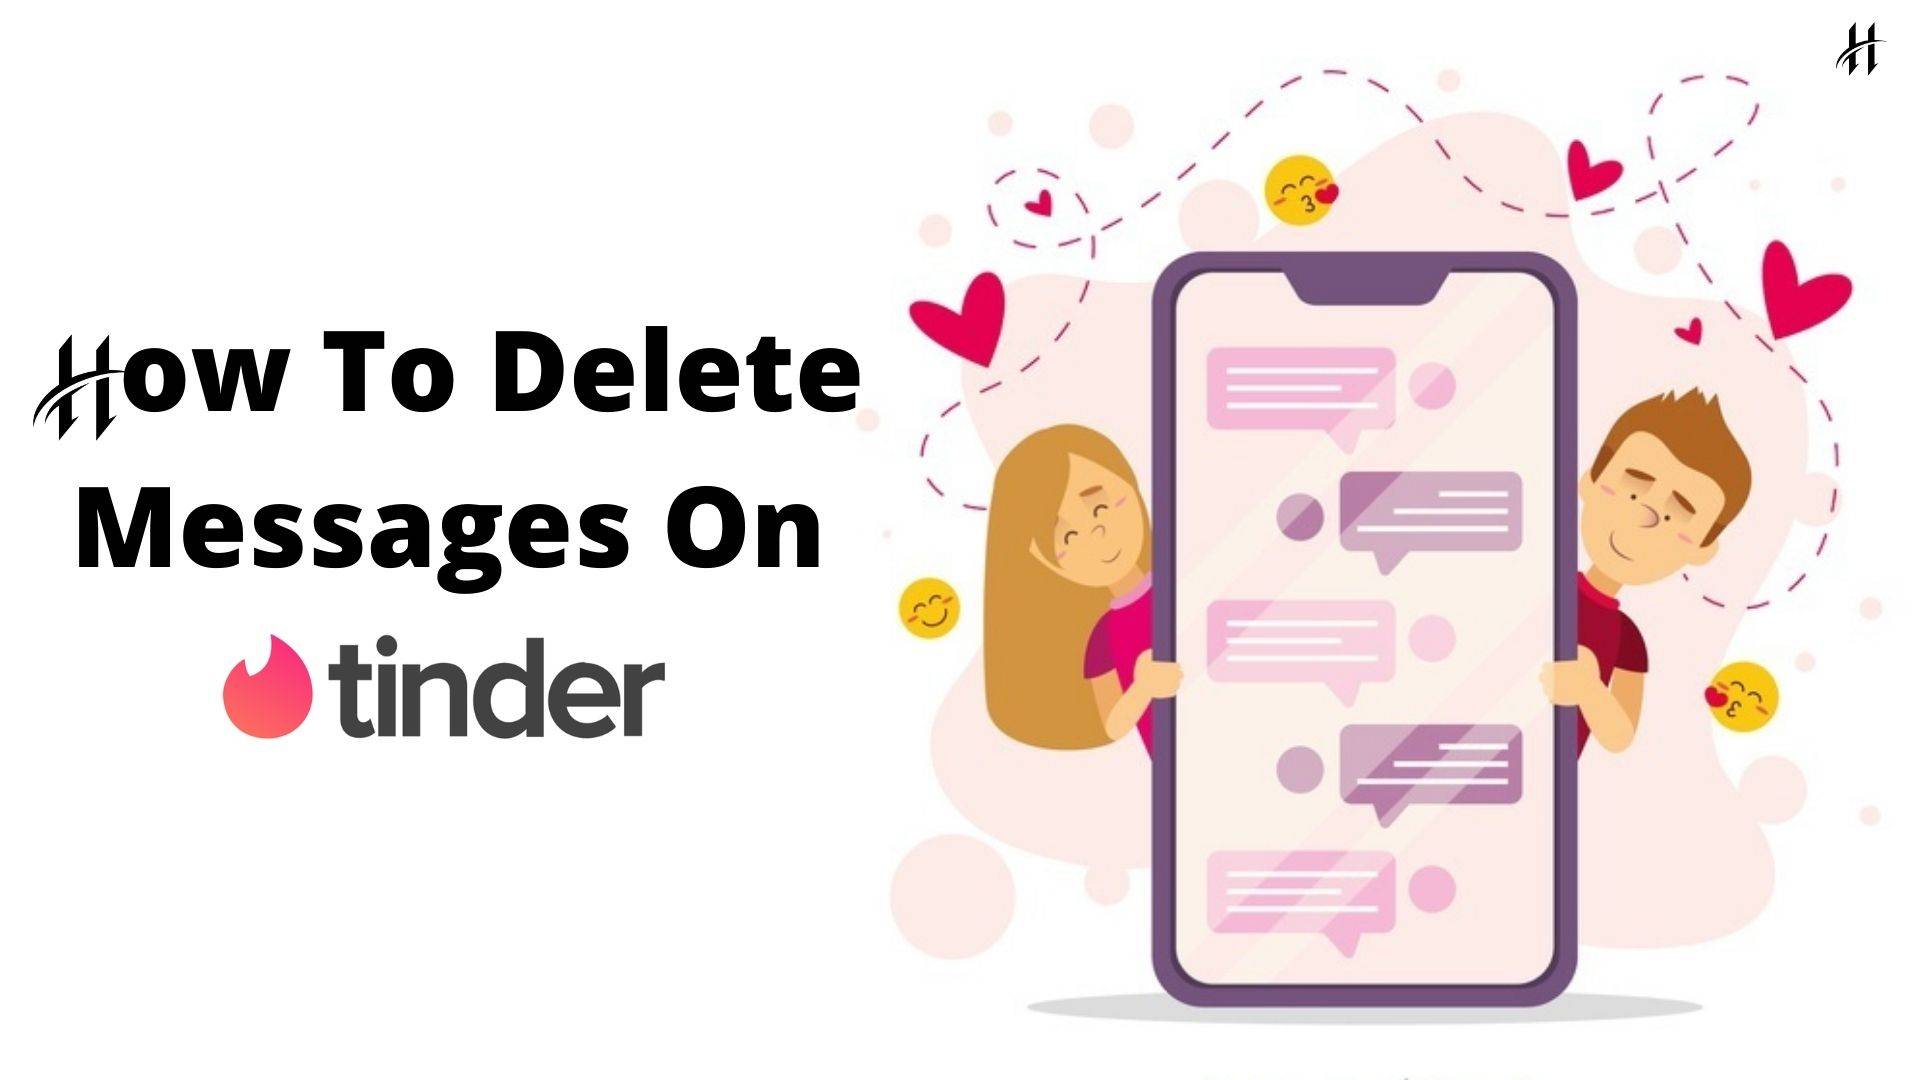 How To Delete Messages On Tinder